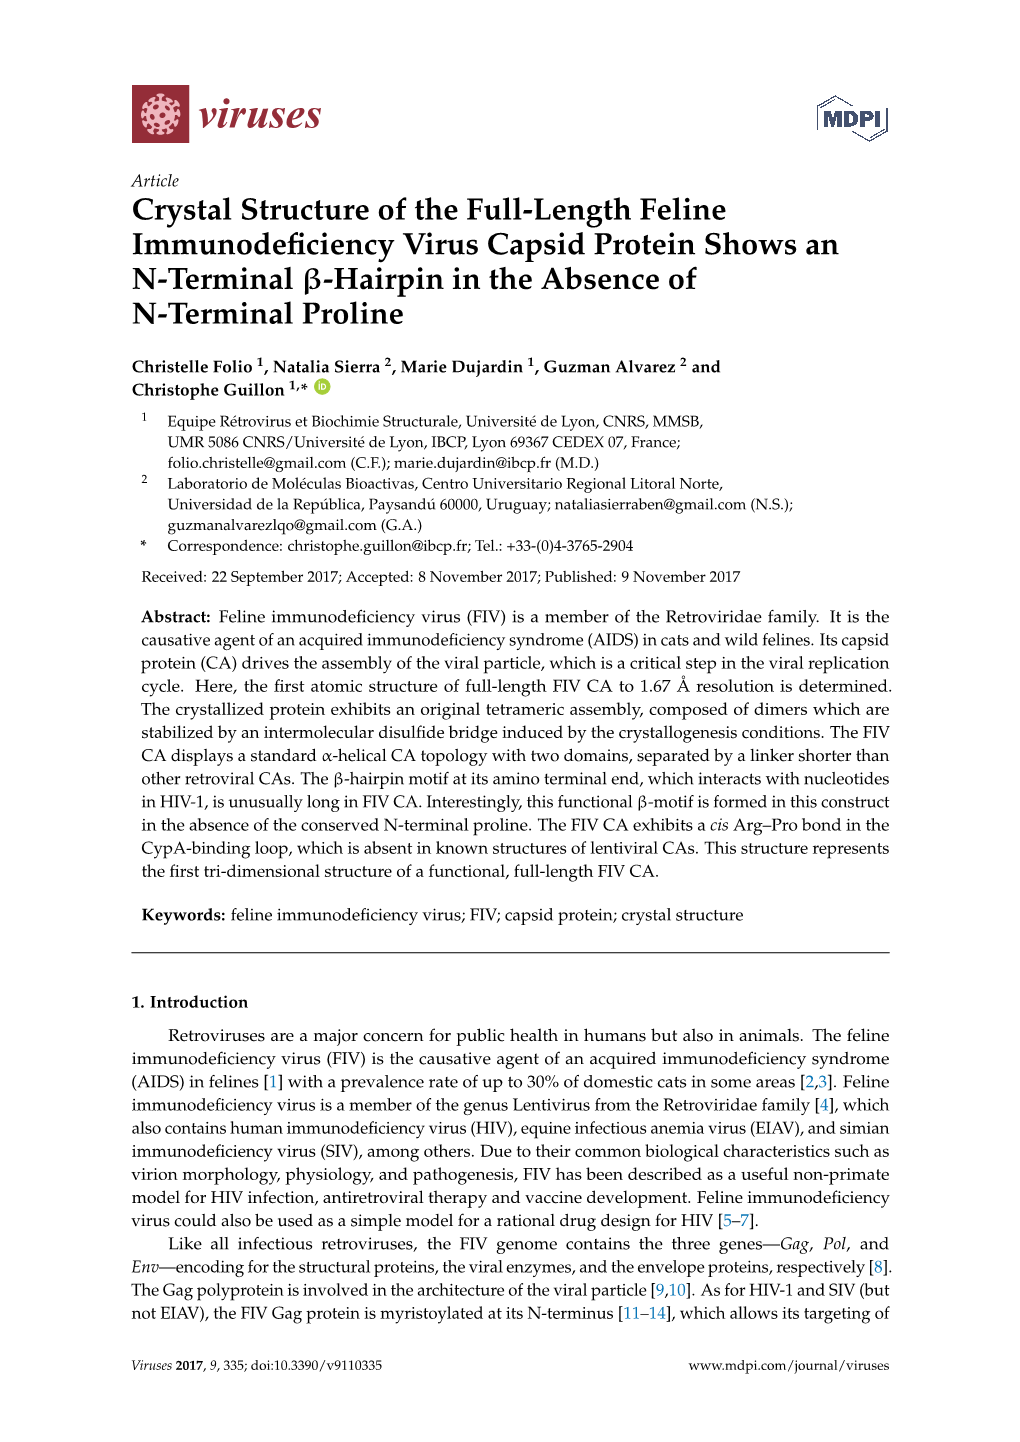 Crystal Structure of the Full-Length Feline Immunodeficiency Virus Capsid Protein Shows an N-Terminal